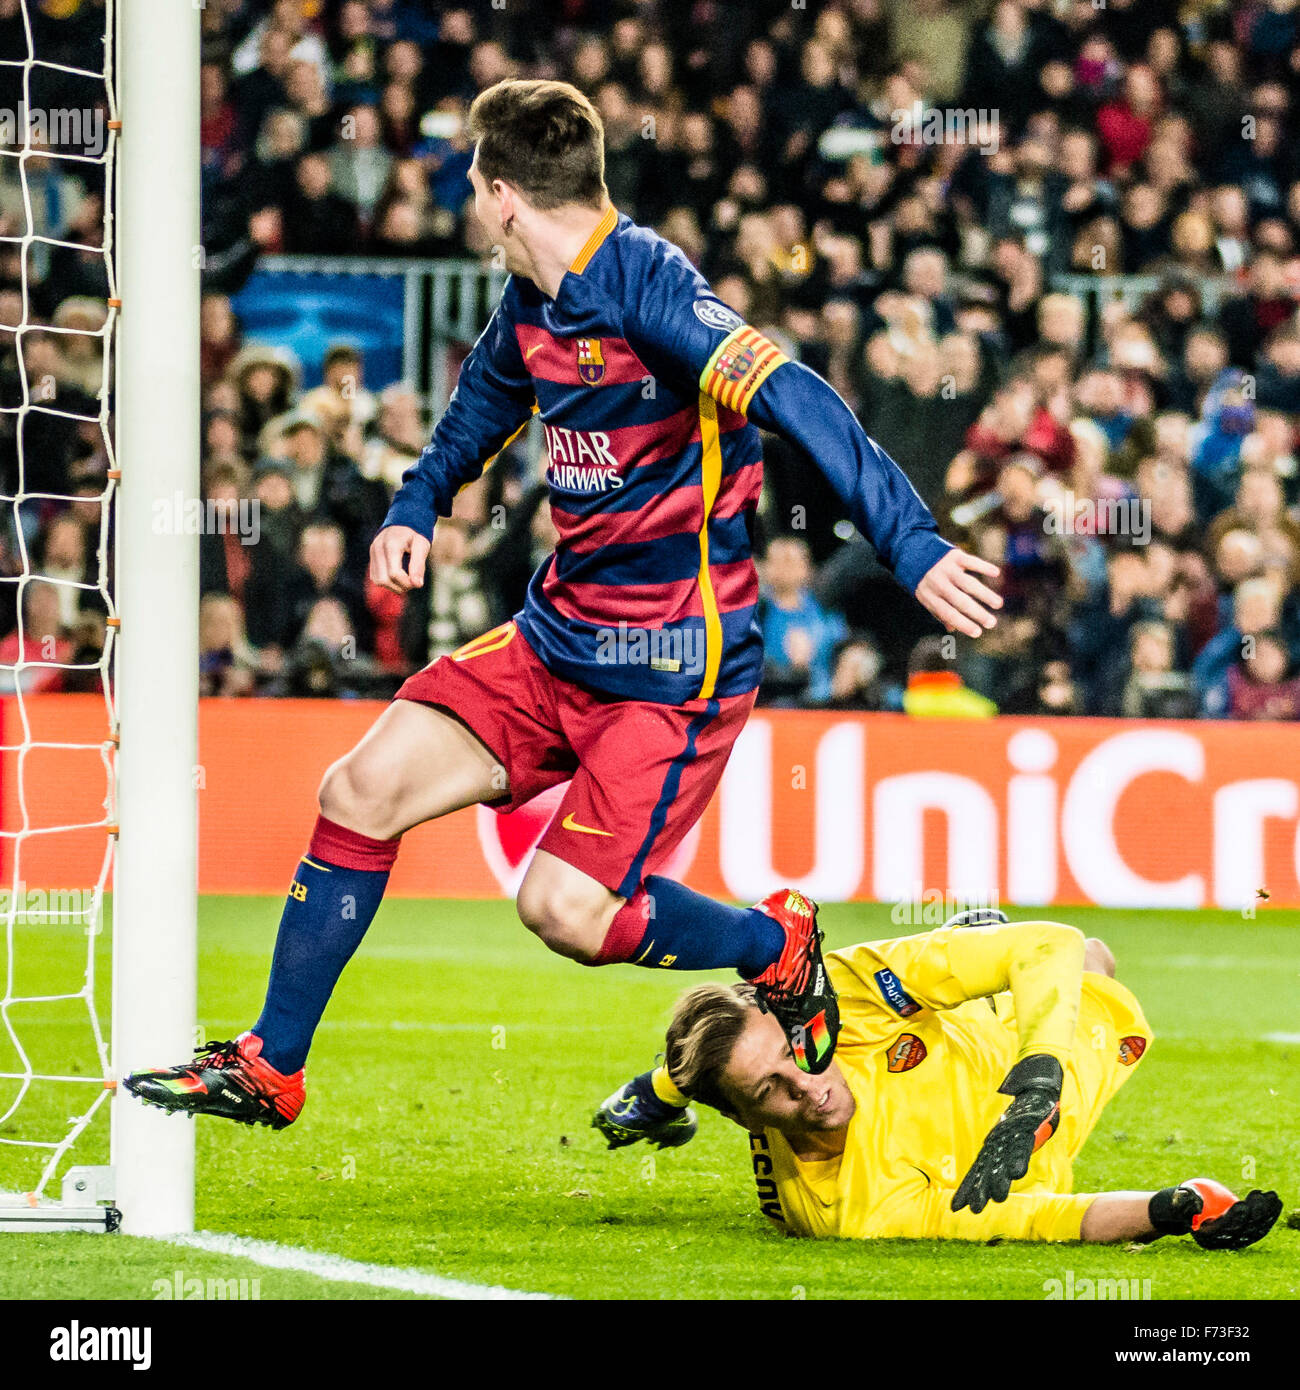 Barcelona, Spain. 24th Nov, 2015. FC Barcelona's forward MESSI scores his team's 5th goal during the Champions League match between FC Barcelona and AS Roma at the Camp Nou stadium in Barcelona Credit:  matthi/Alamy Live News Stock Photo